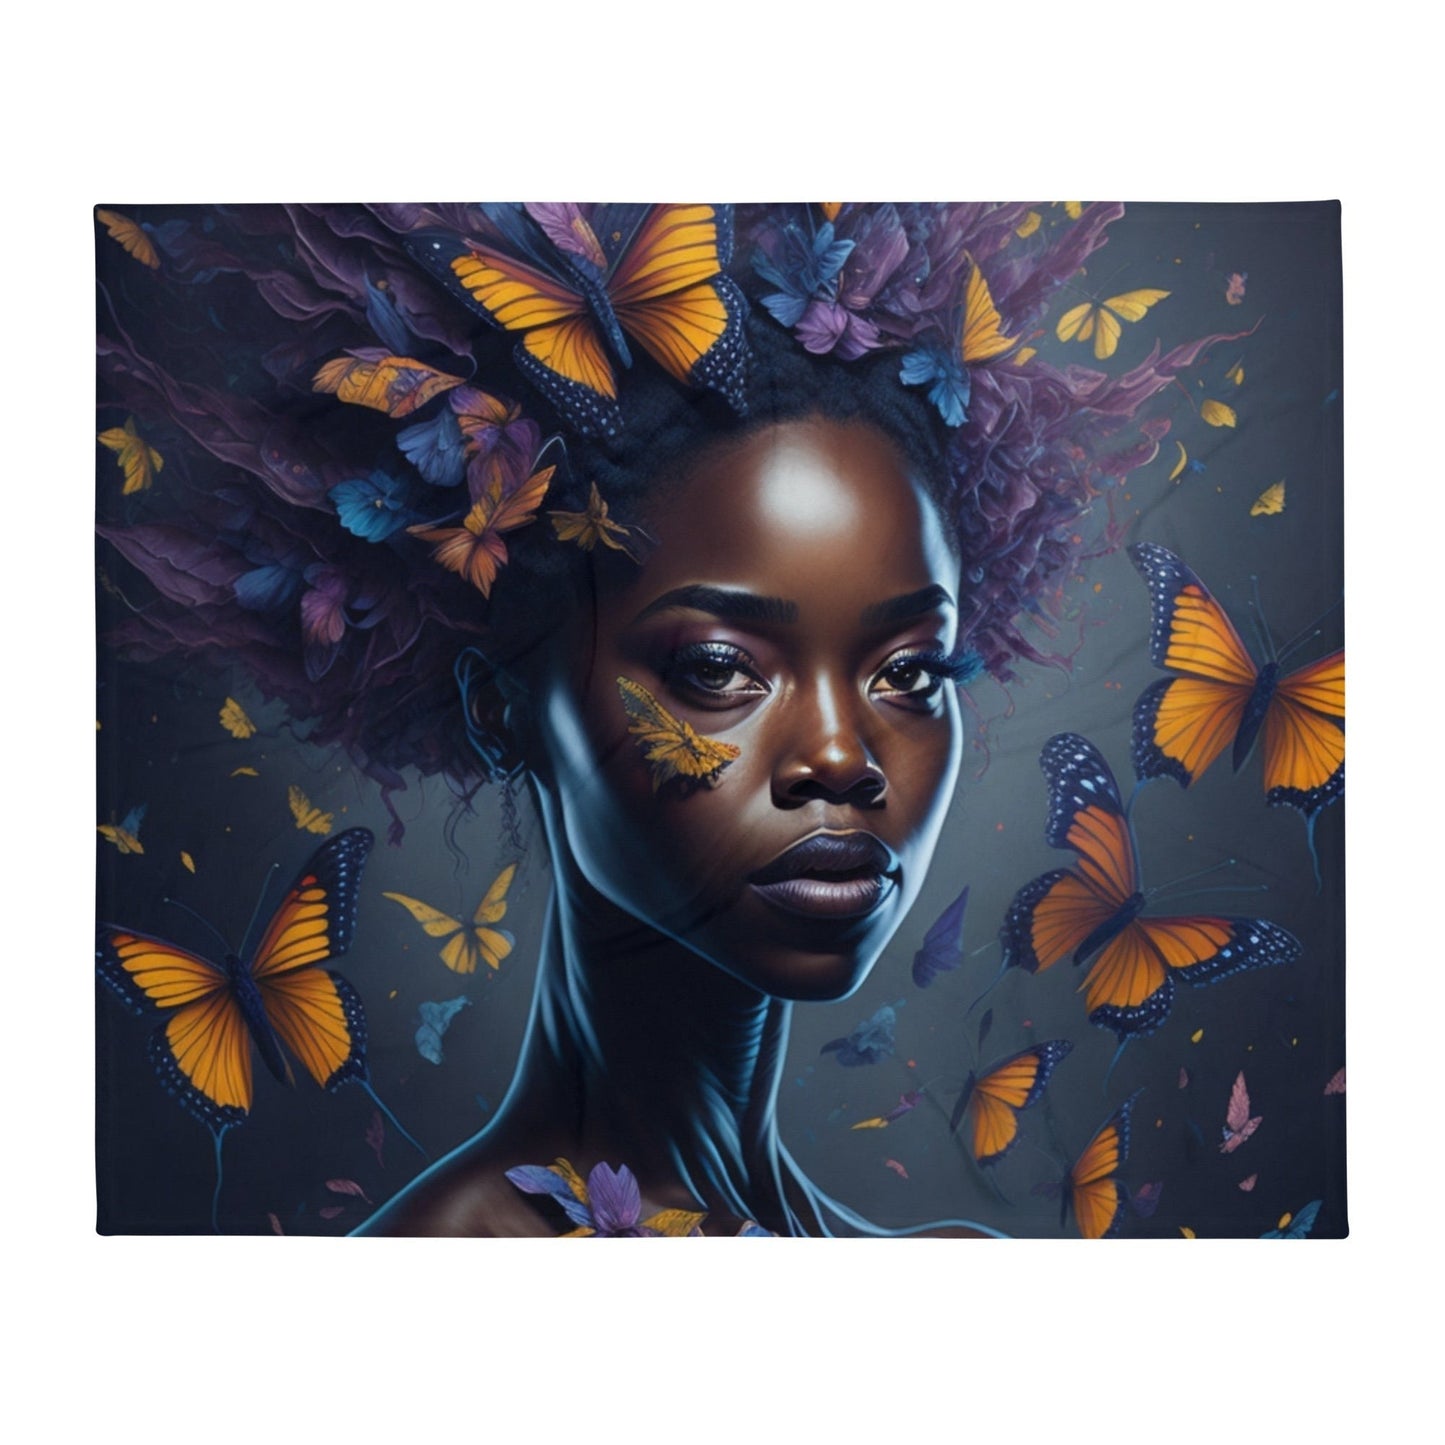 Graceful Wings: Portrait of an African American Woman with Fluttering Butterflies Throw Blanket-THROW BLANKET-50″×60″-Ethereal Flight-mysticalcherry